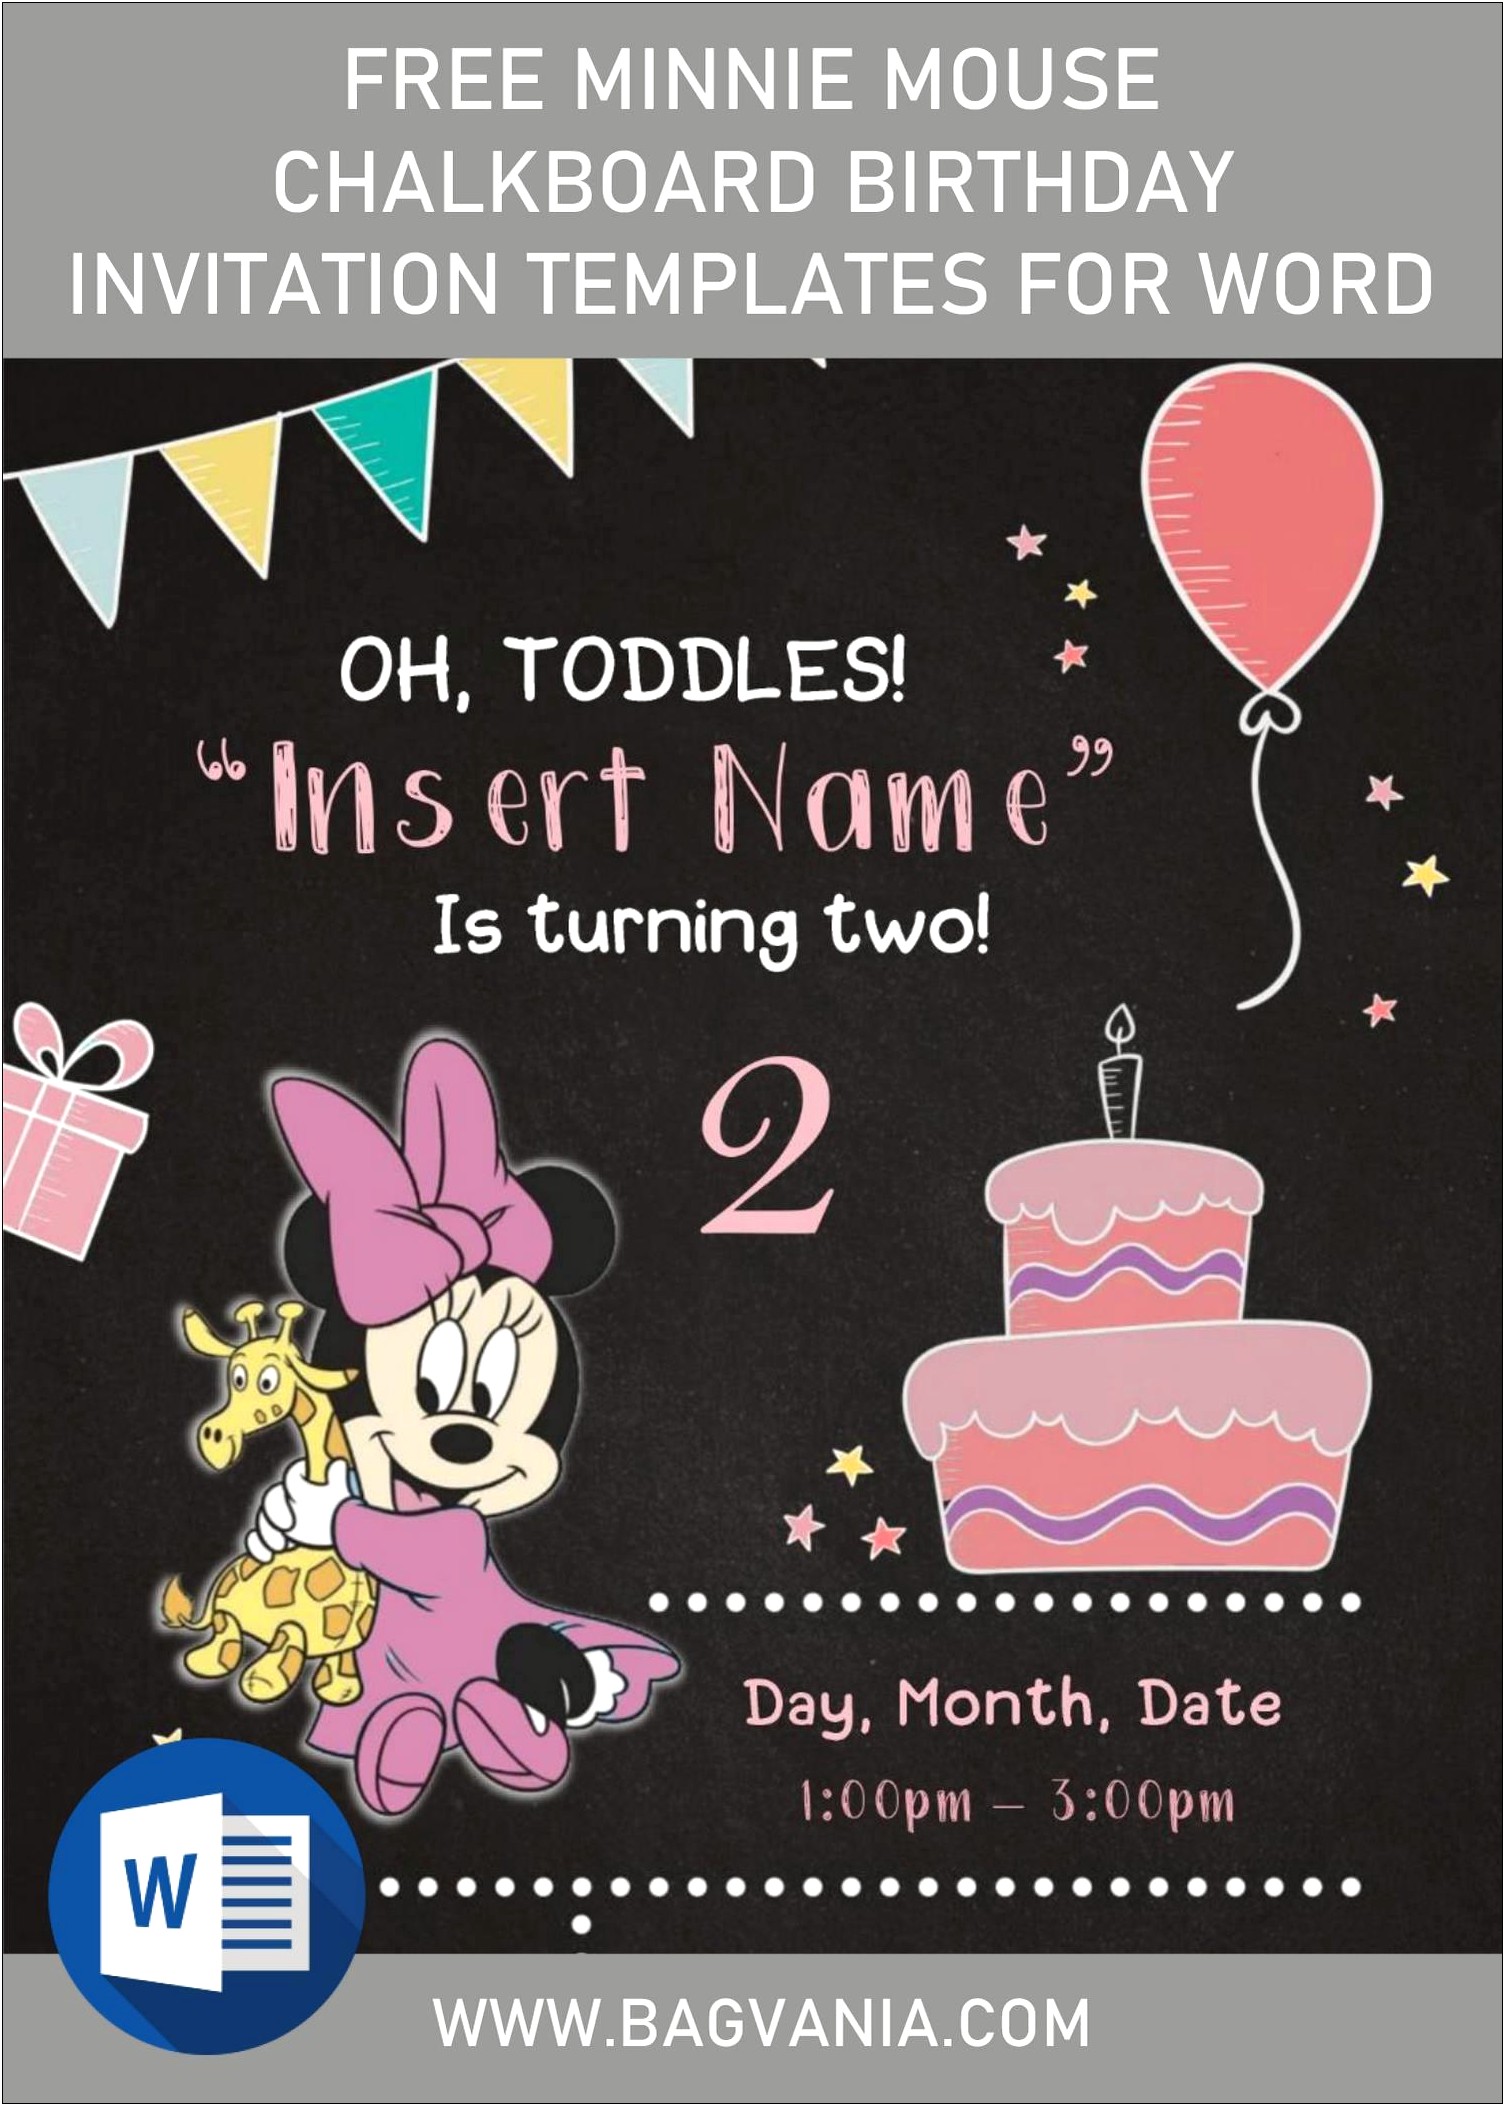 Free Minnie Mouse Birthday Party Templates